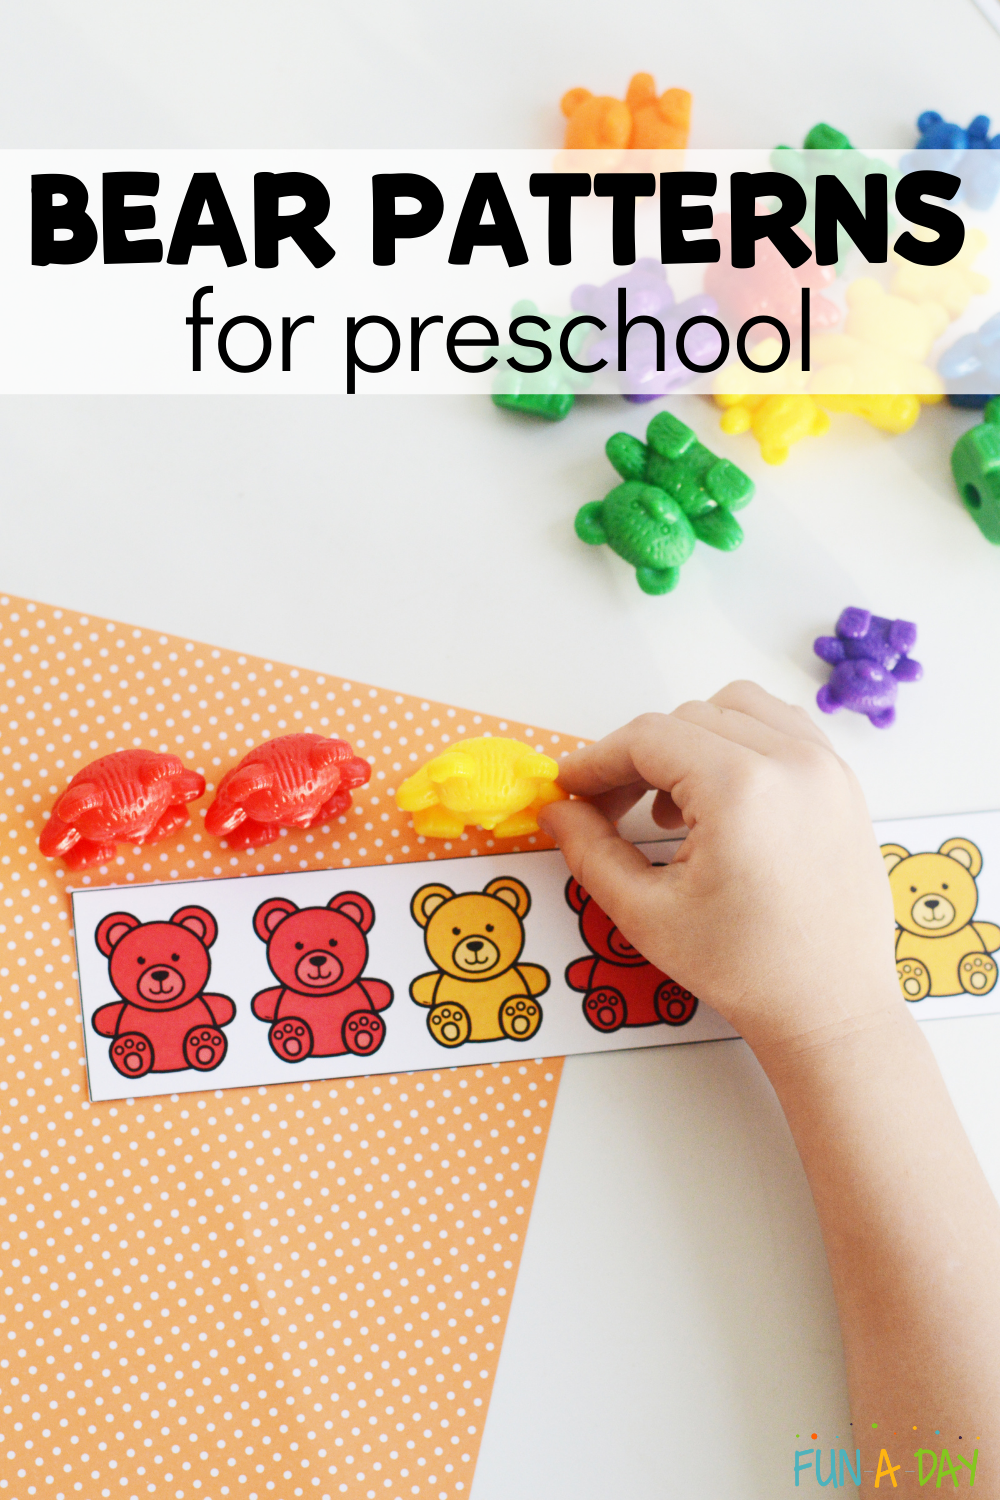 Preschooler placing counting bears in a pattern with text that reads bear patterns for preschool